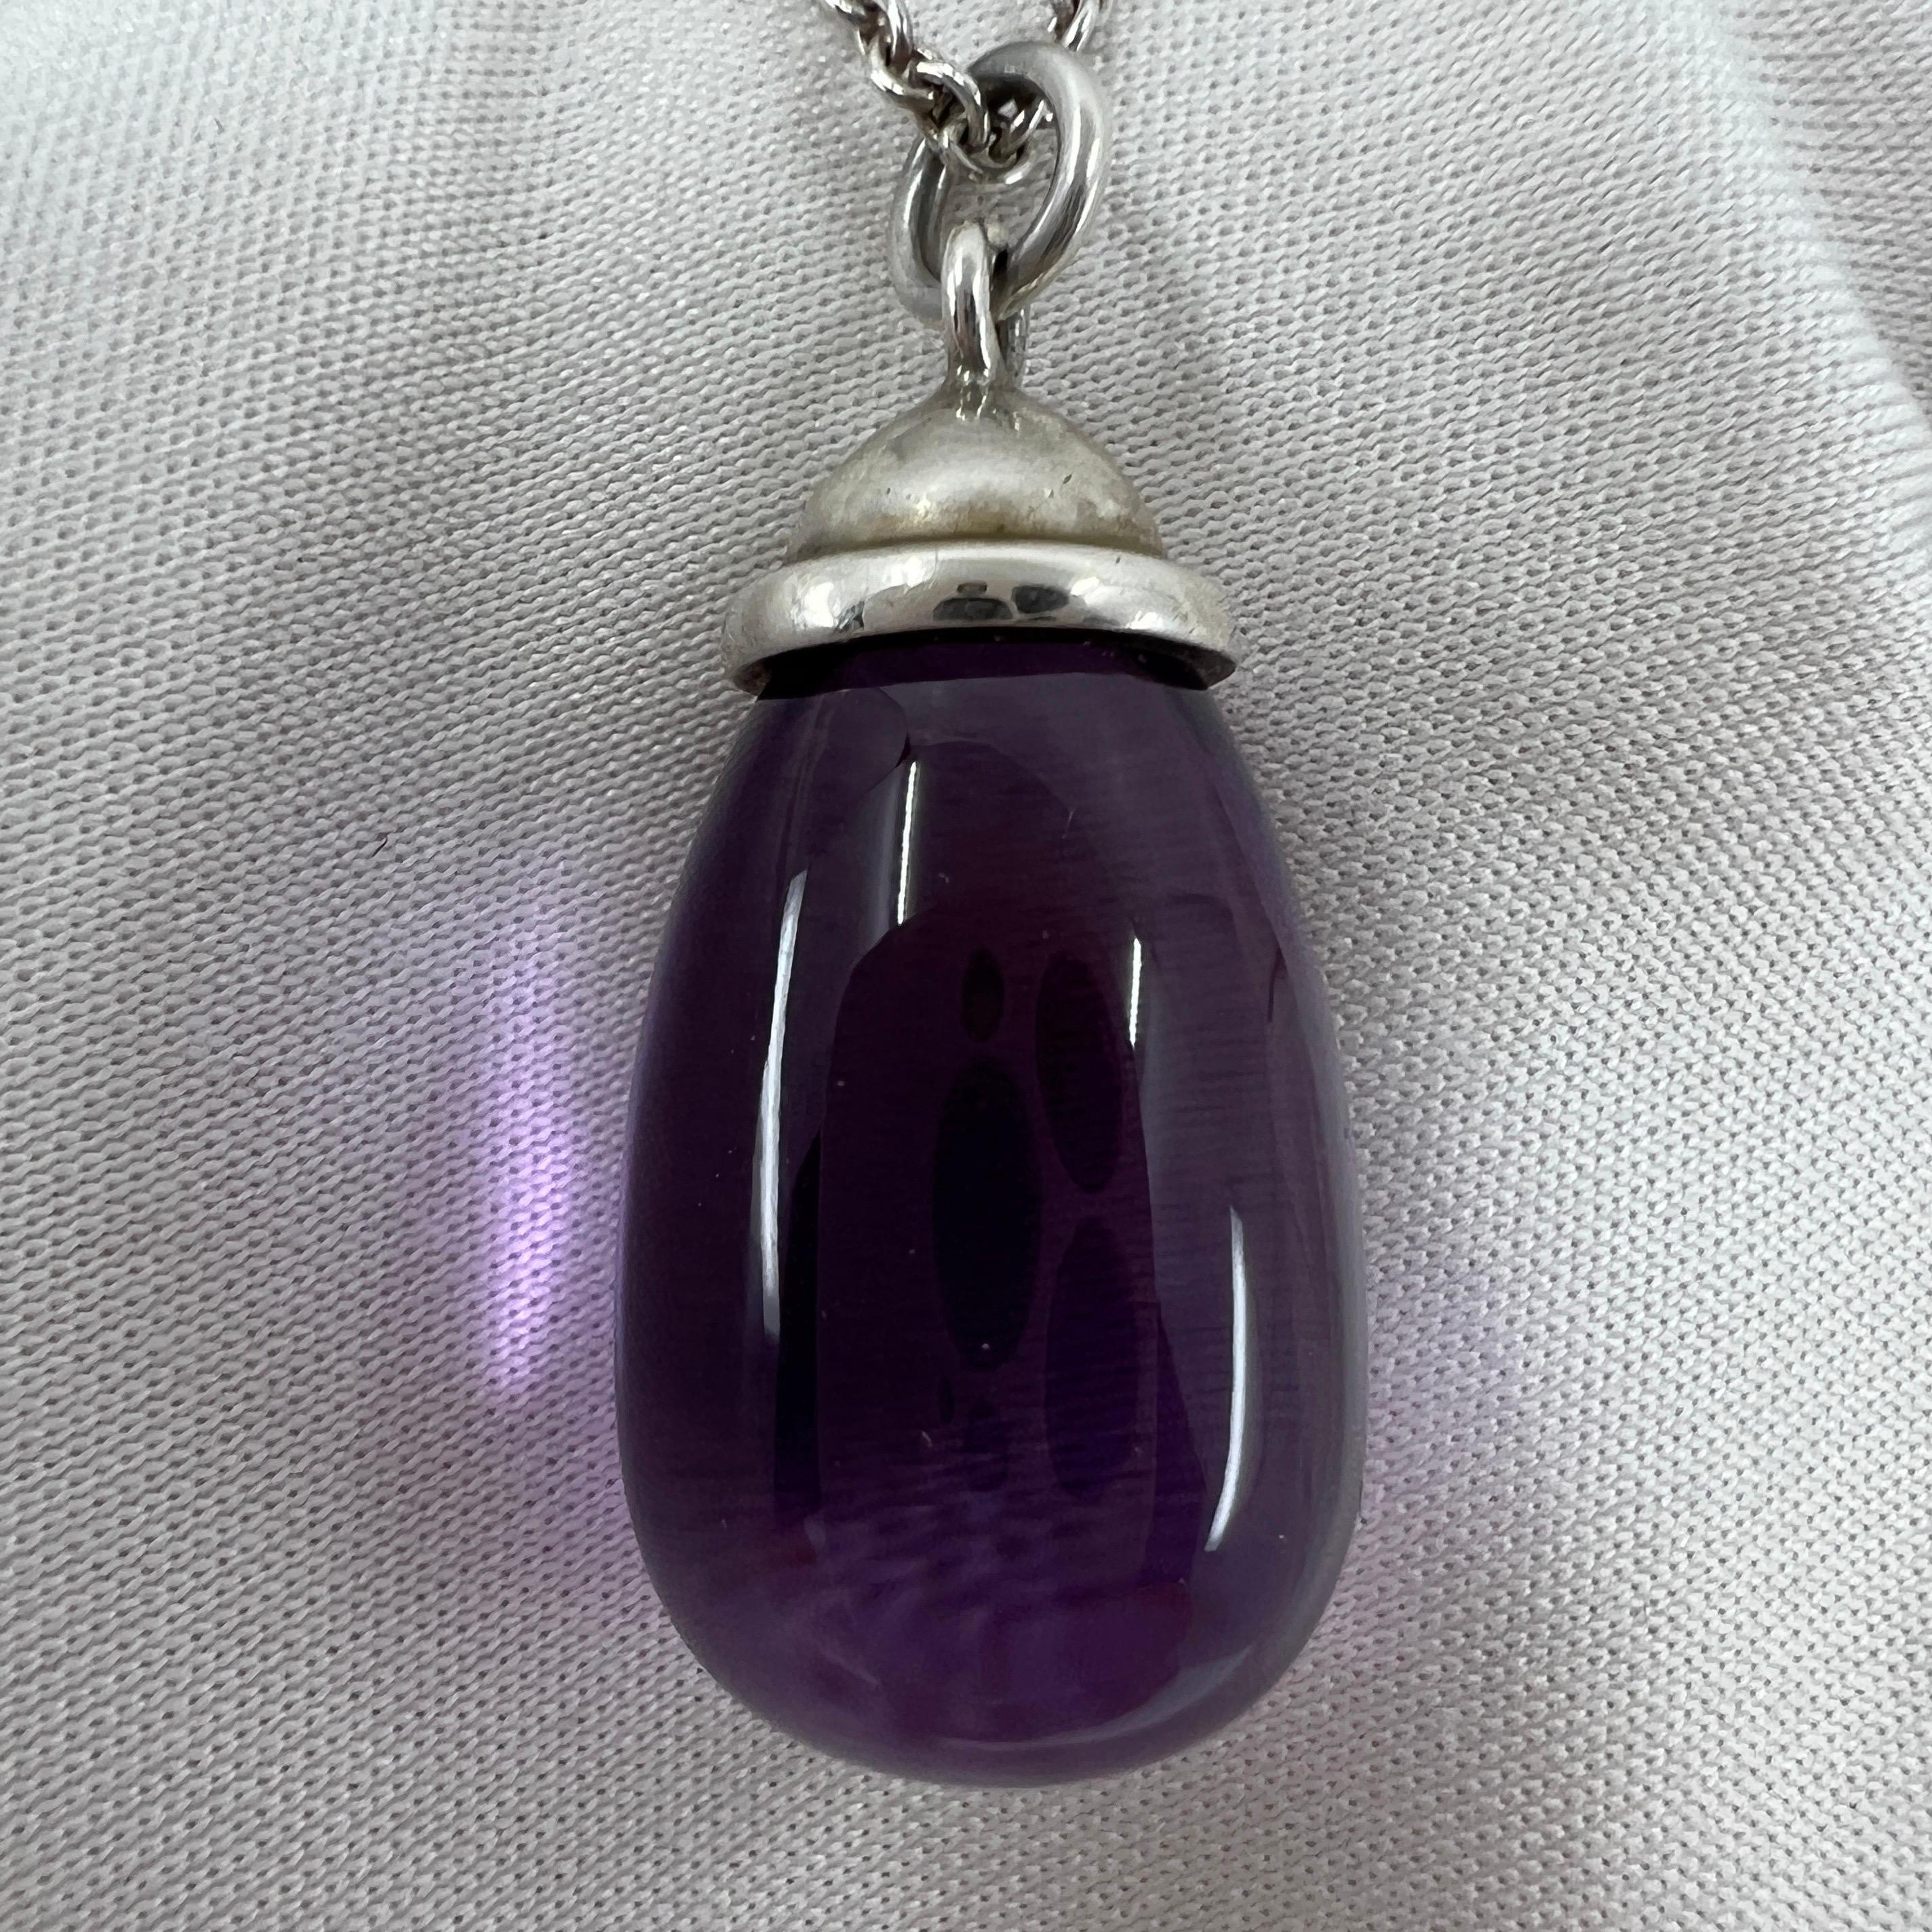 Rare Tiffany & Co. Paloma Picasso Sterling Silver Amethyst Drop Pendant Necklace 1